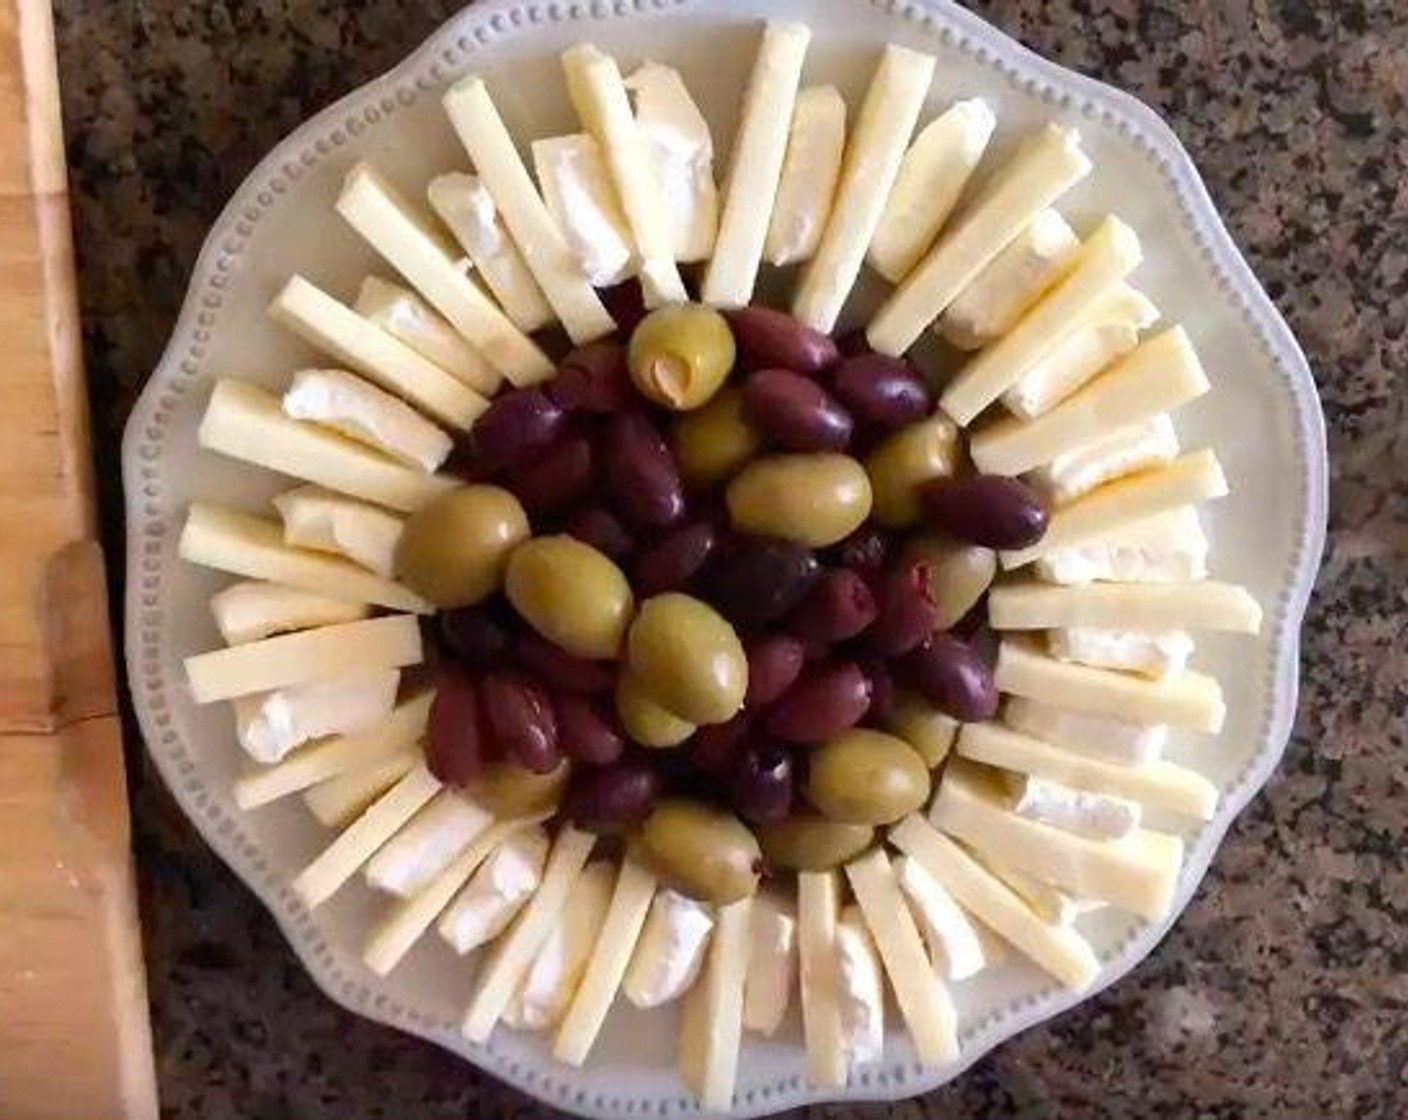 step 5 Mix Garlic Stuffed Olives (1 cup), Kalamata Olives (1 cup) together and add to the center of the circle.